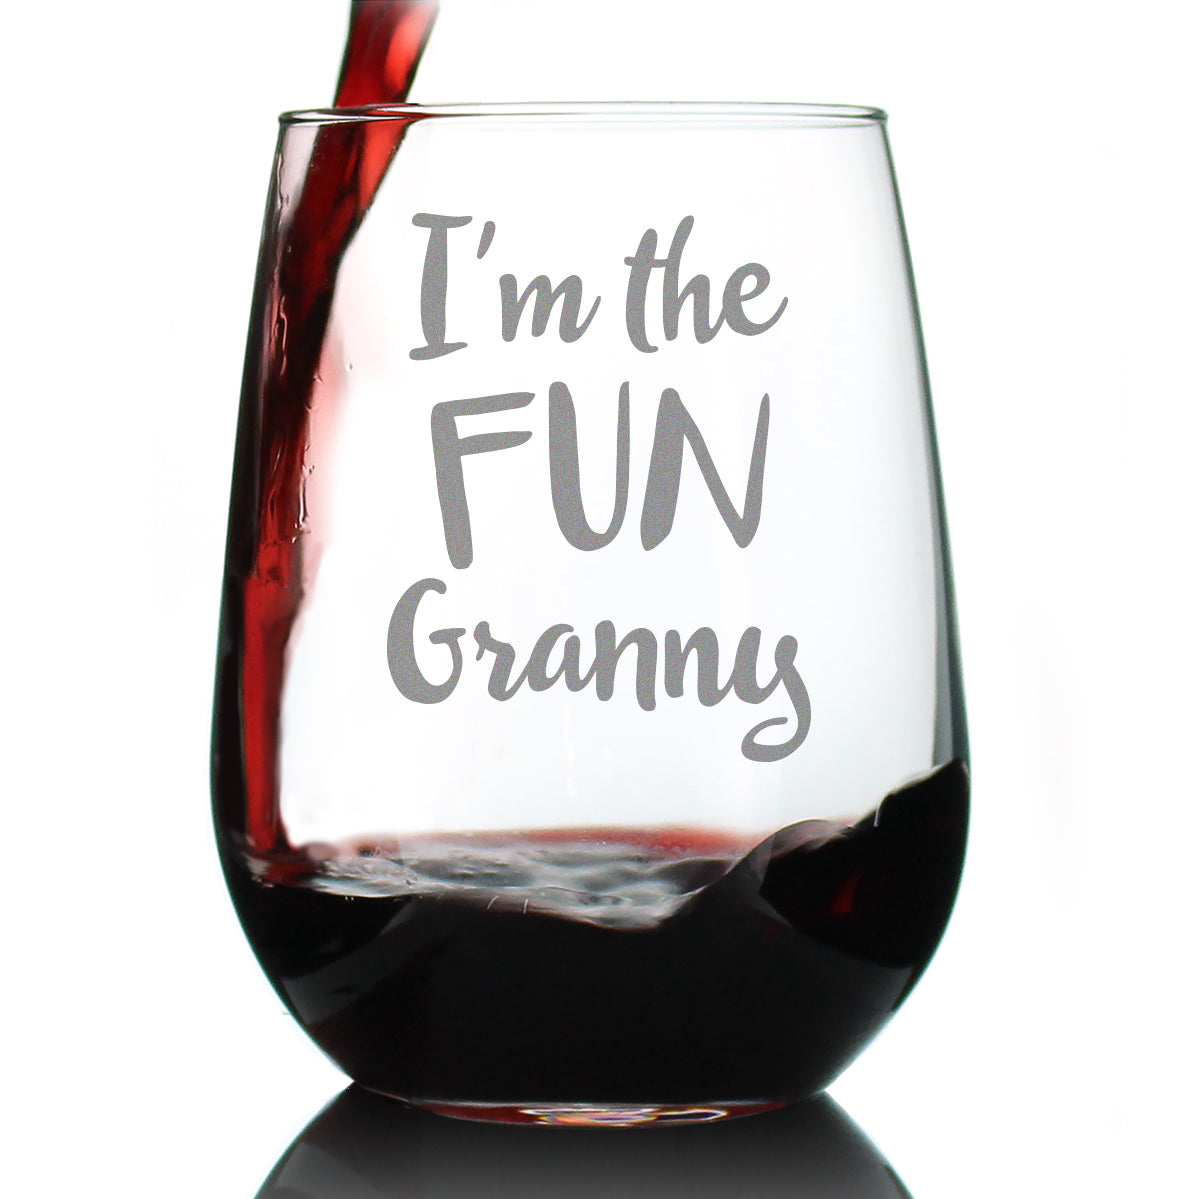 I&#39;m the Fun Granny Cute Funny Stemless Wine Glass, Large 17 Ounce Size, Etched Sayings, Gift